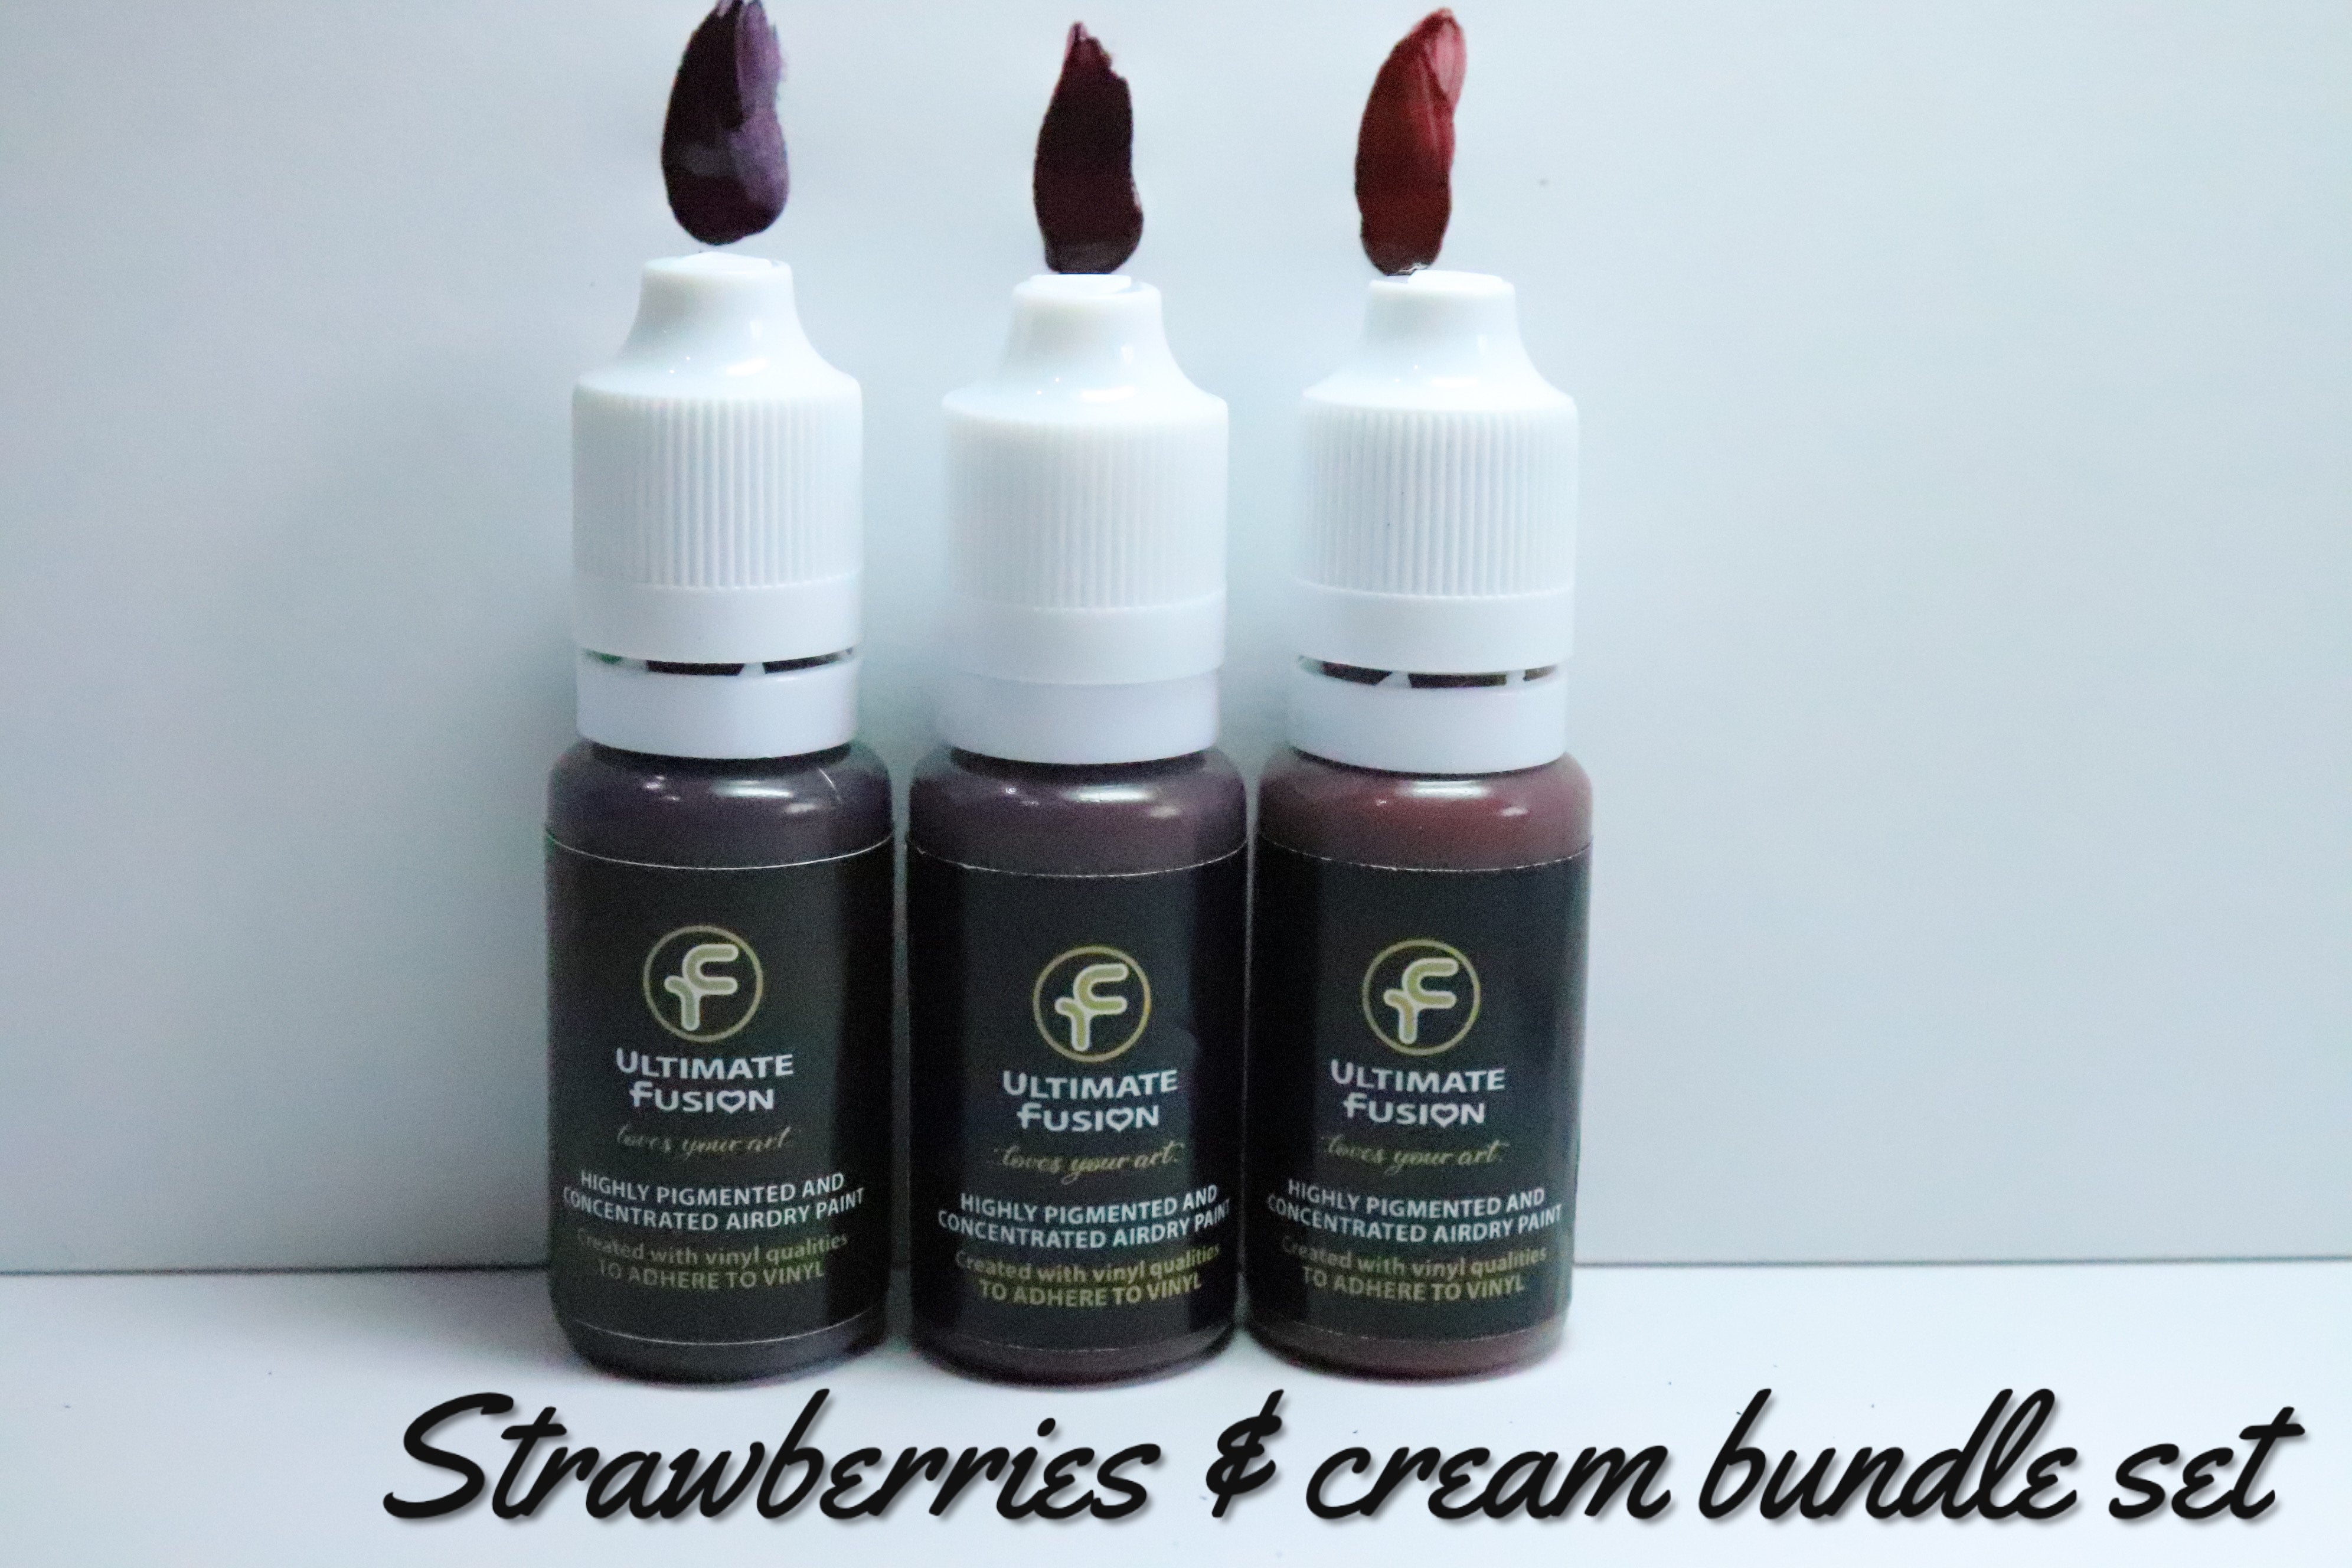 Strawberries and Cream (3 pack) Bundle Deal